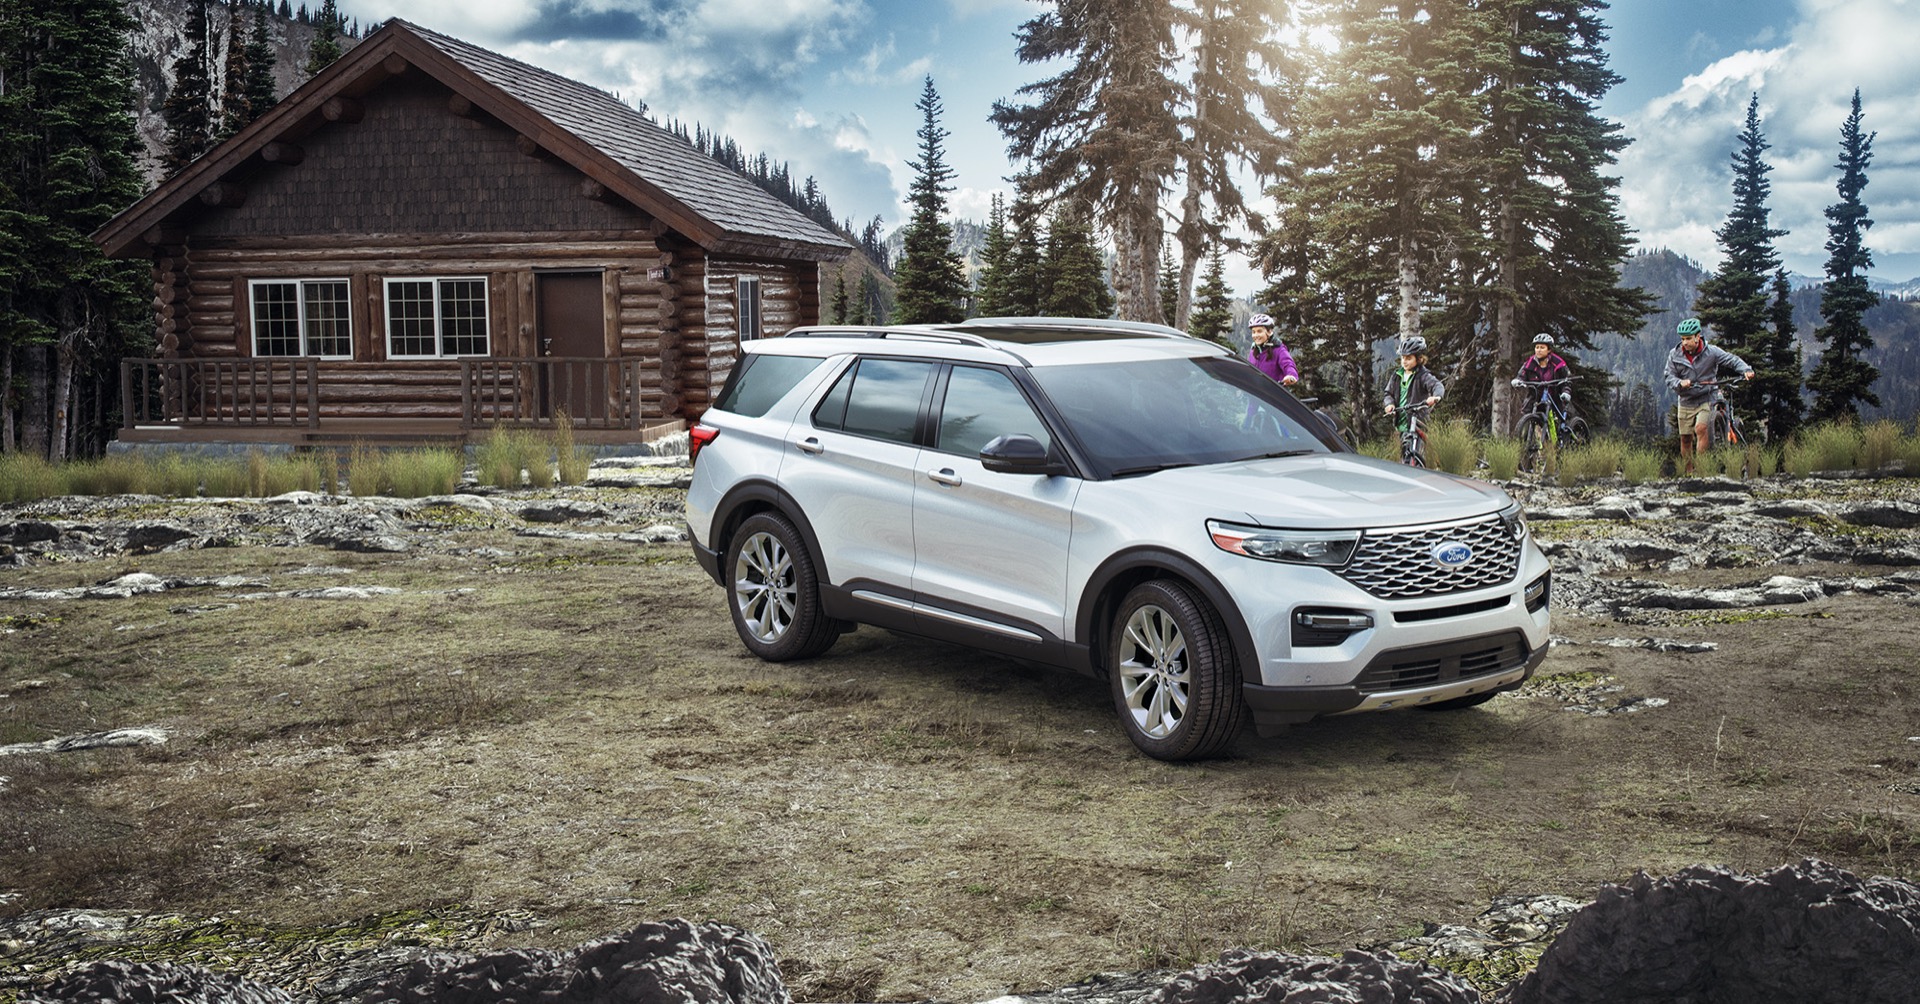 Ford cuts price of 2021 Ford Explorer SUV by about $3,000